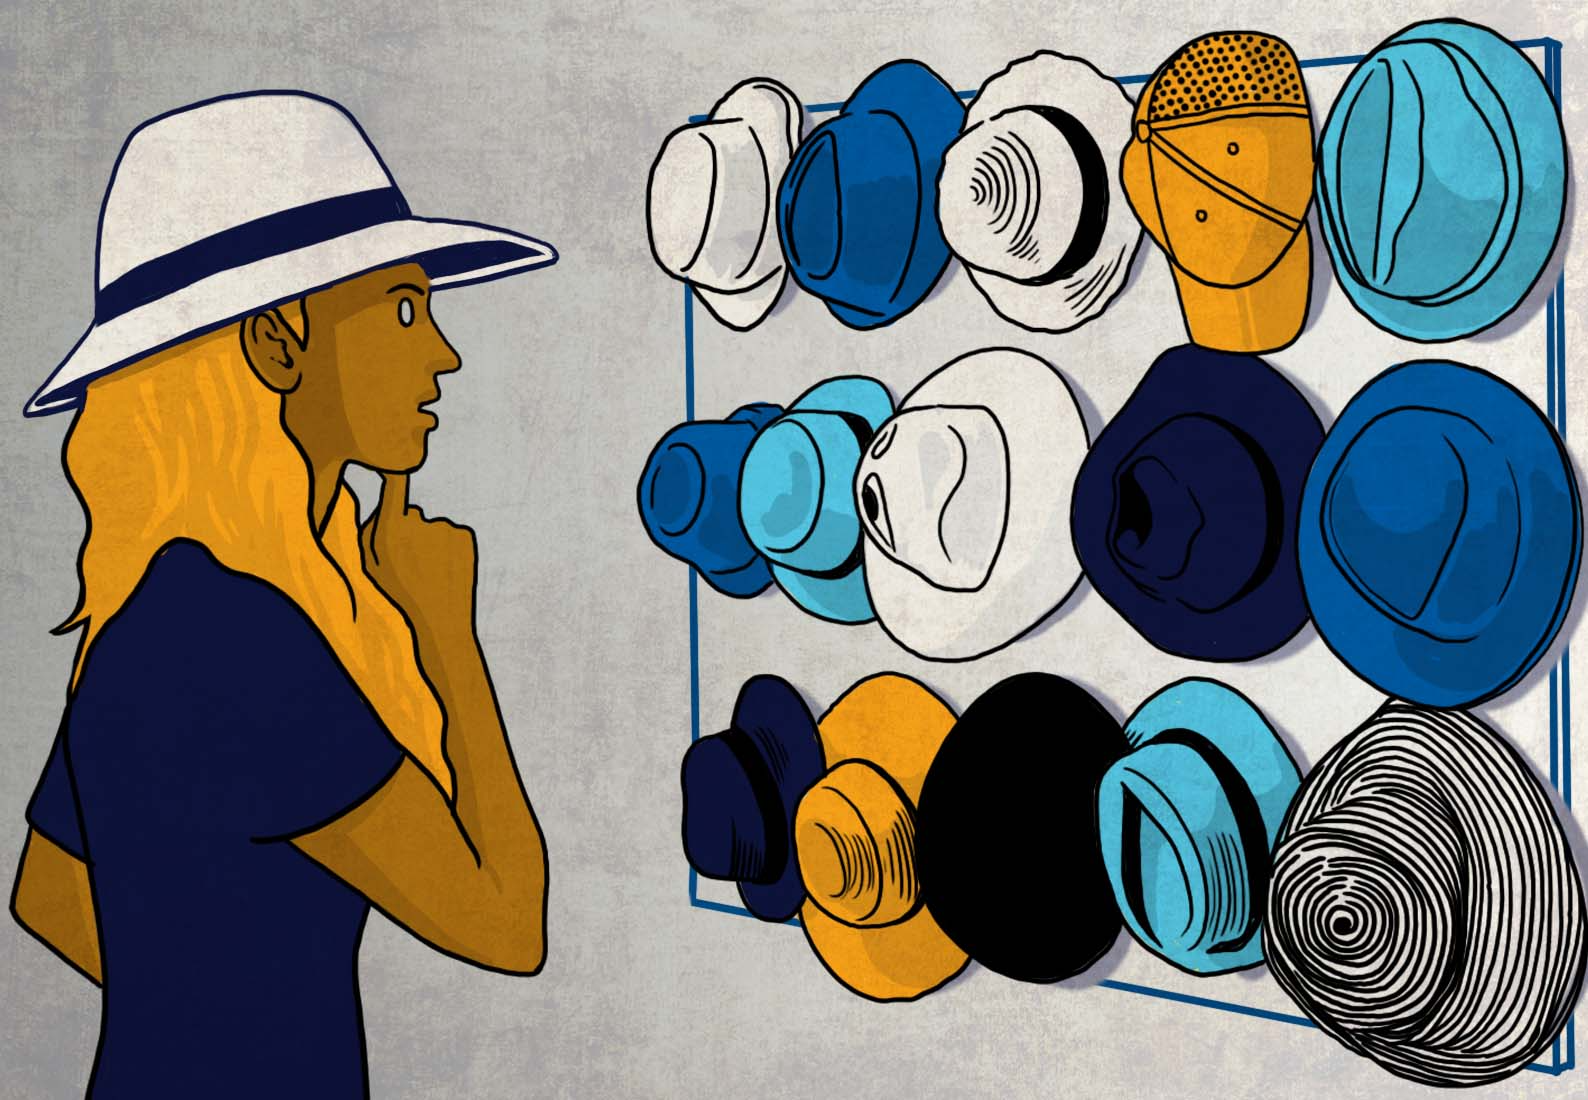 A woman who works as an Application Scientist looks at a wall of hats, trying to decide which one to wear.